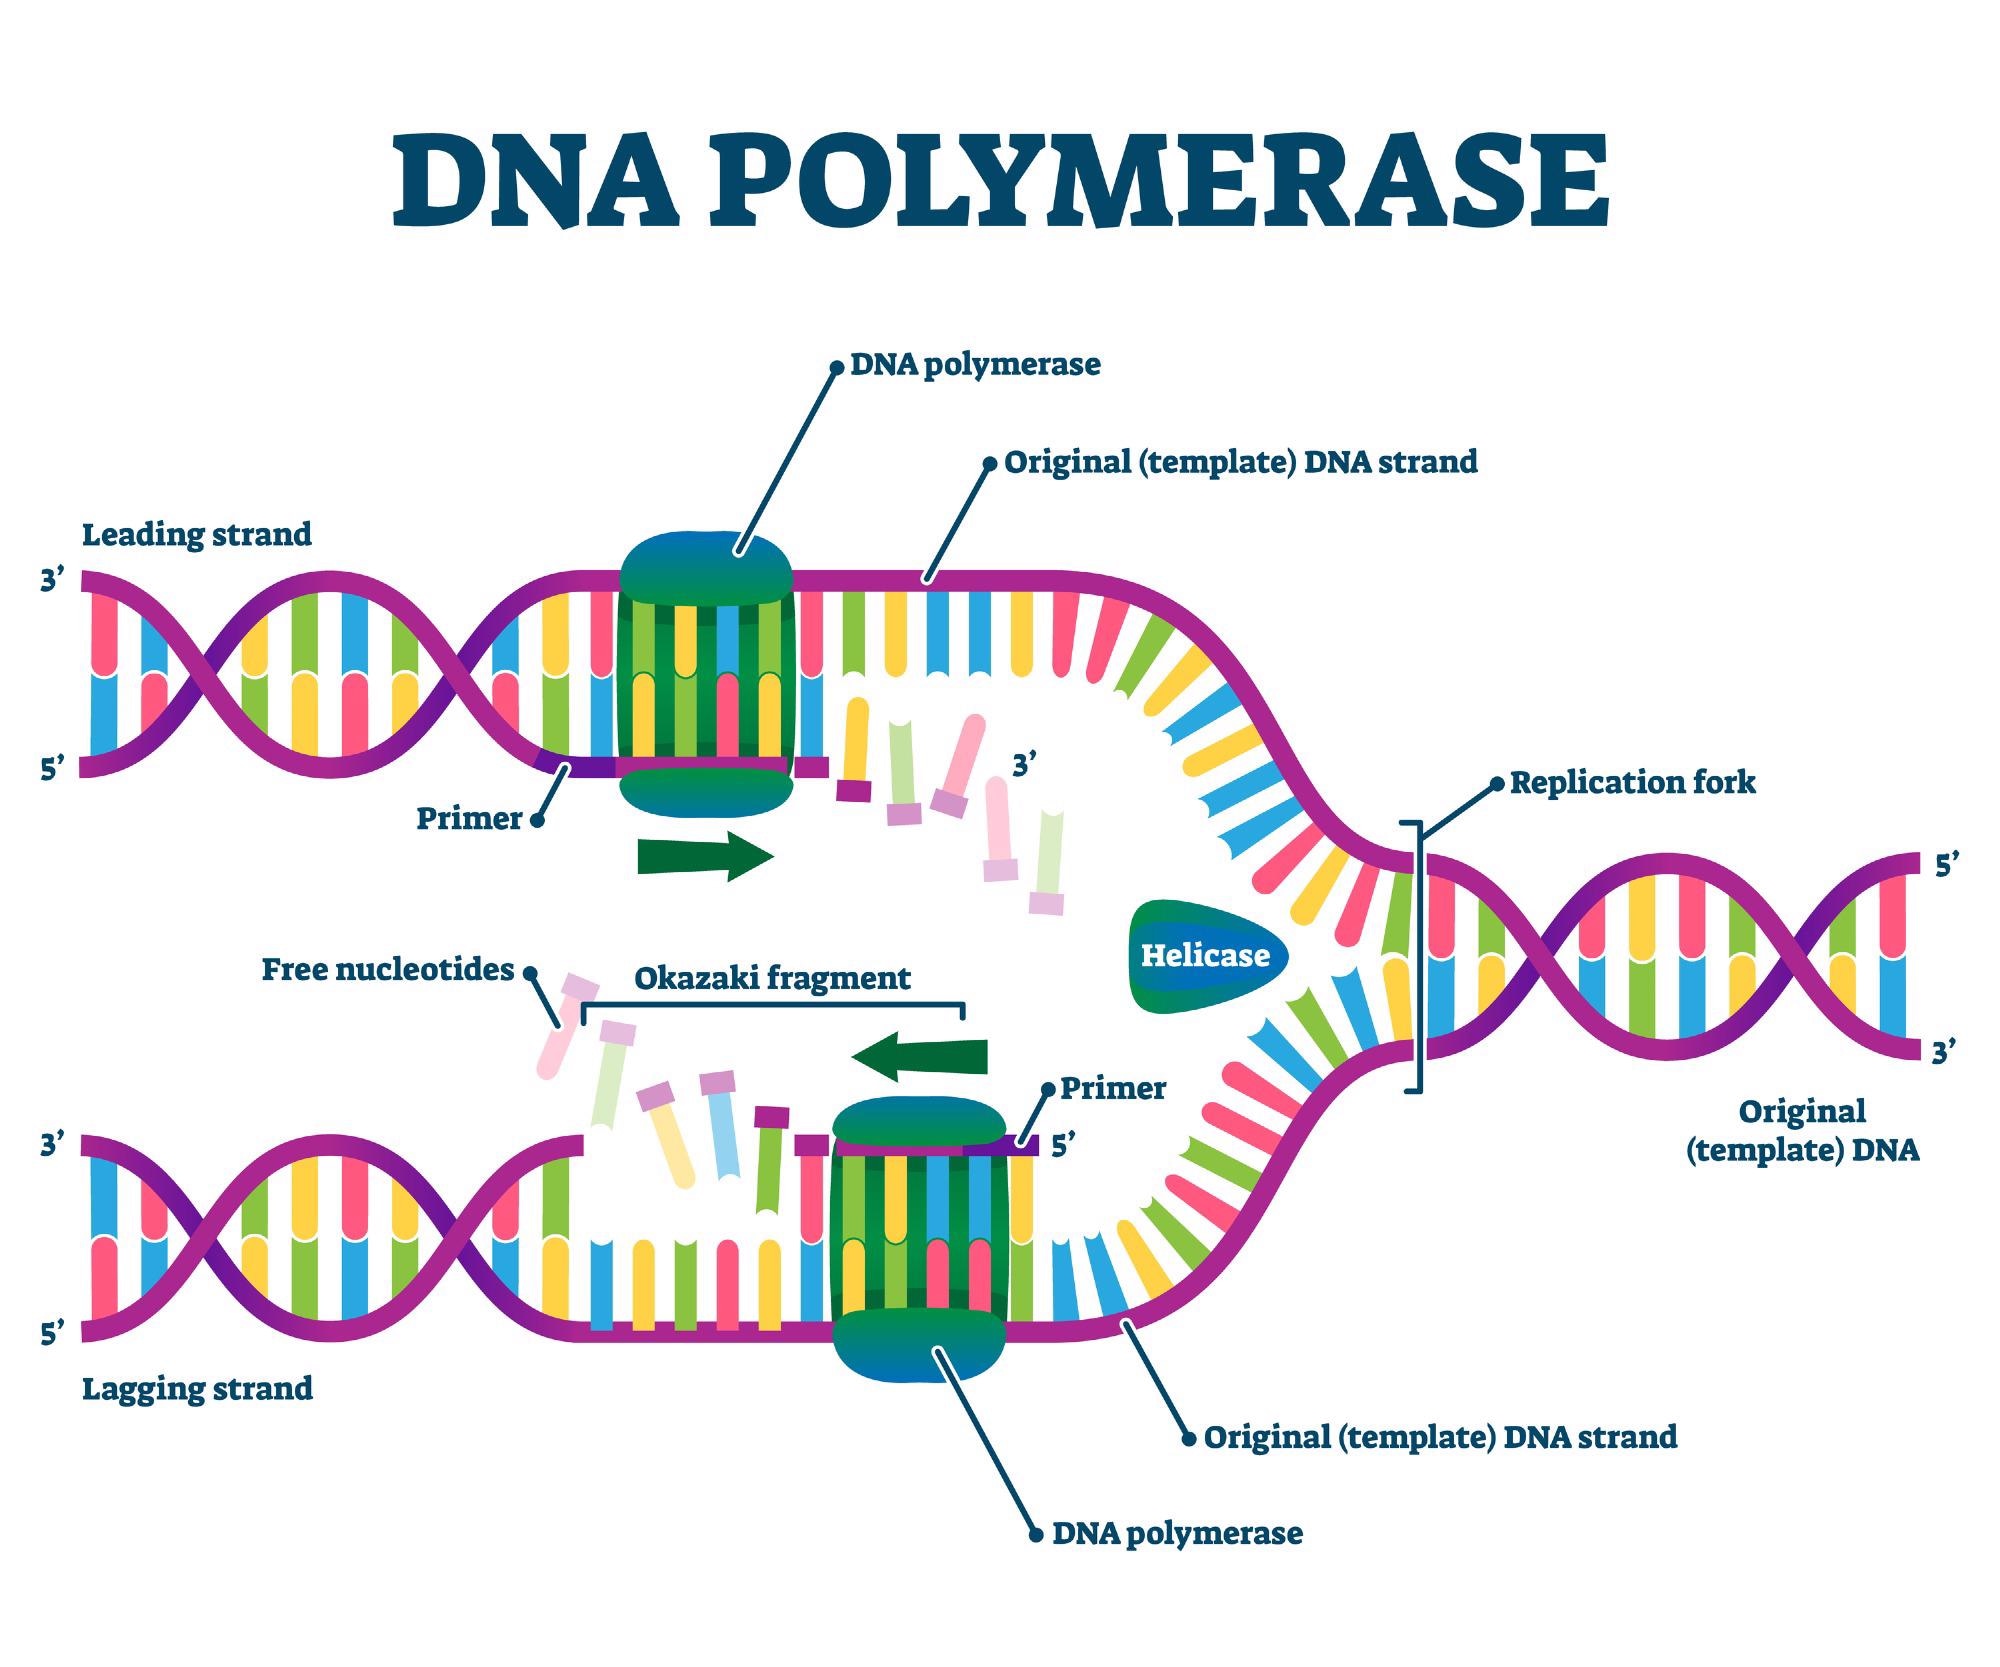 DNA Polymerase enzyme syntheses labeled educational vector illustration. Image Credit: VectorMine / Shutterstock